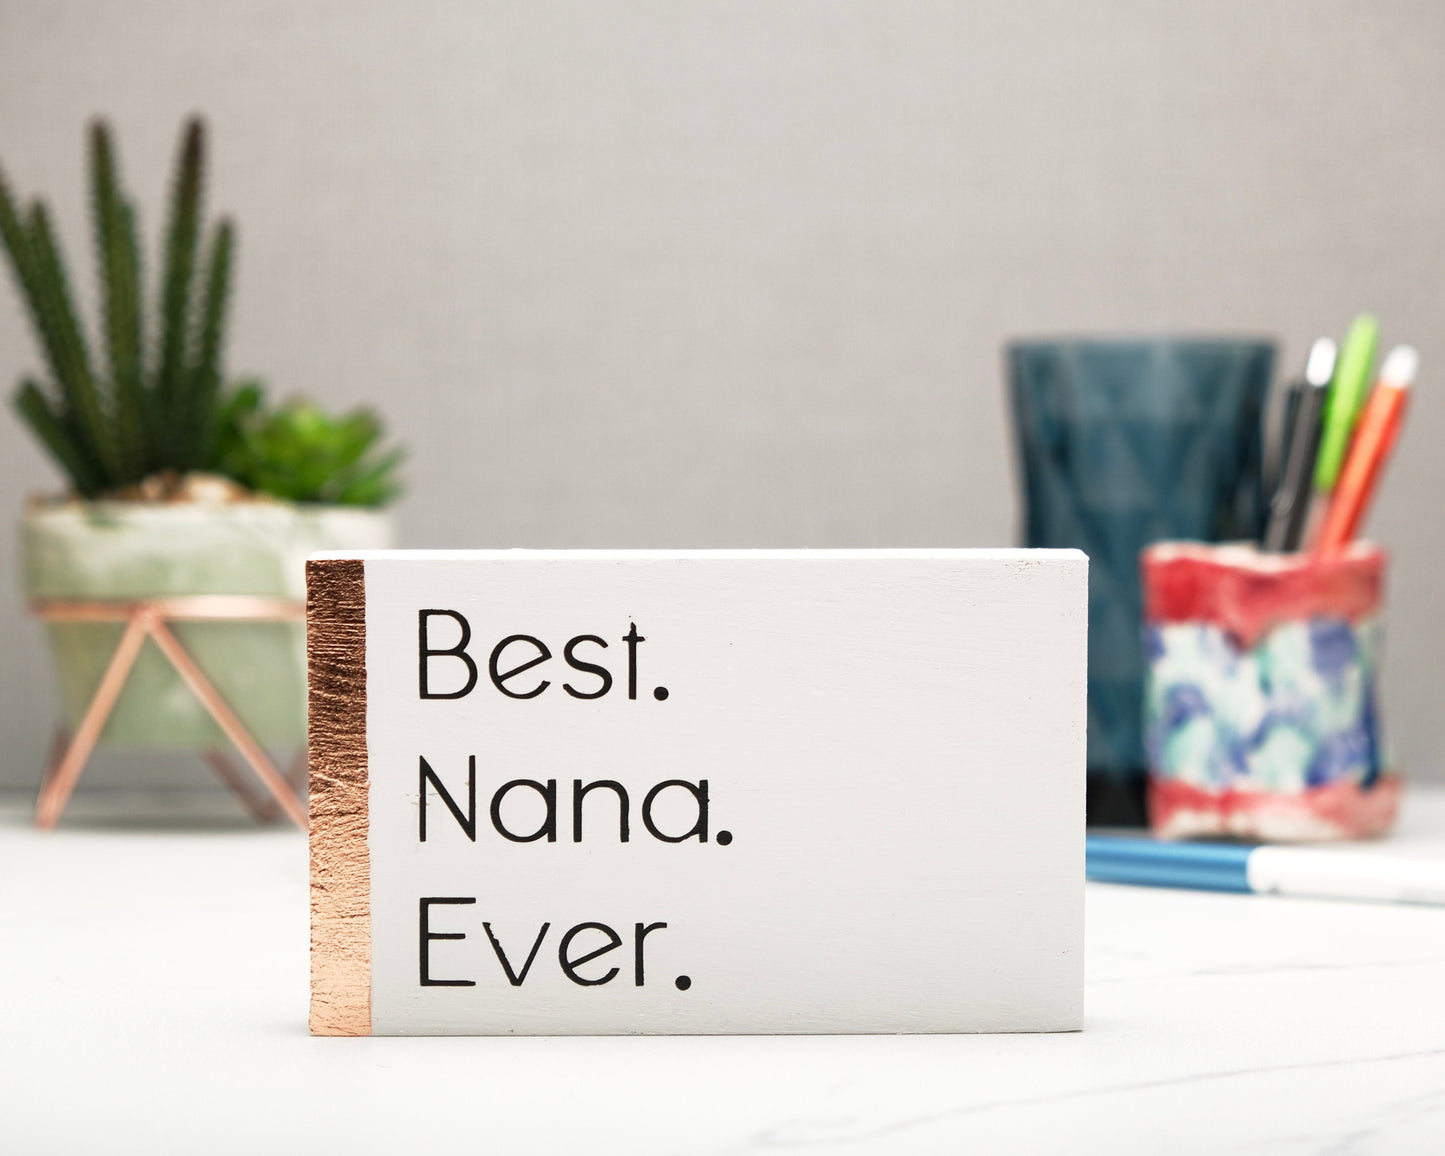 Small freestanding rectangular wooden sign facing straight on. White color with bronze rose gold leaf vertical border on left side. Black painted message in thin font, Best. Nana. Ever. Plant and pen pot out of focus in background.